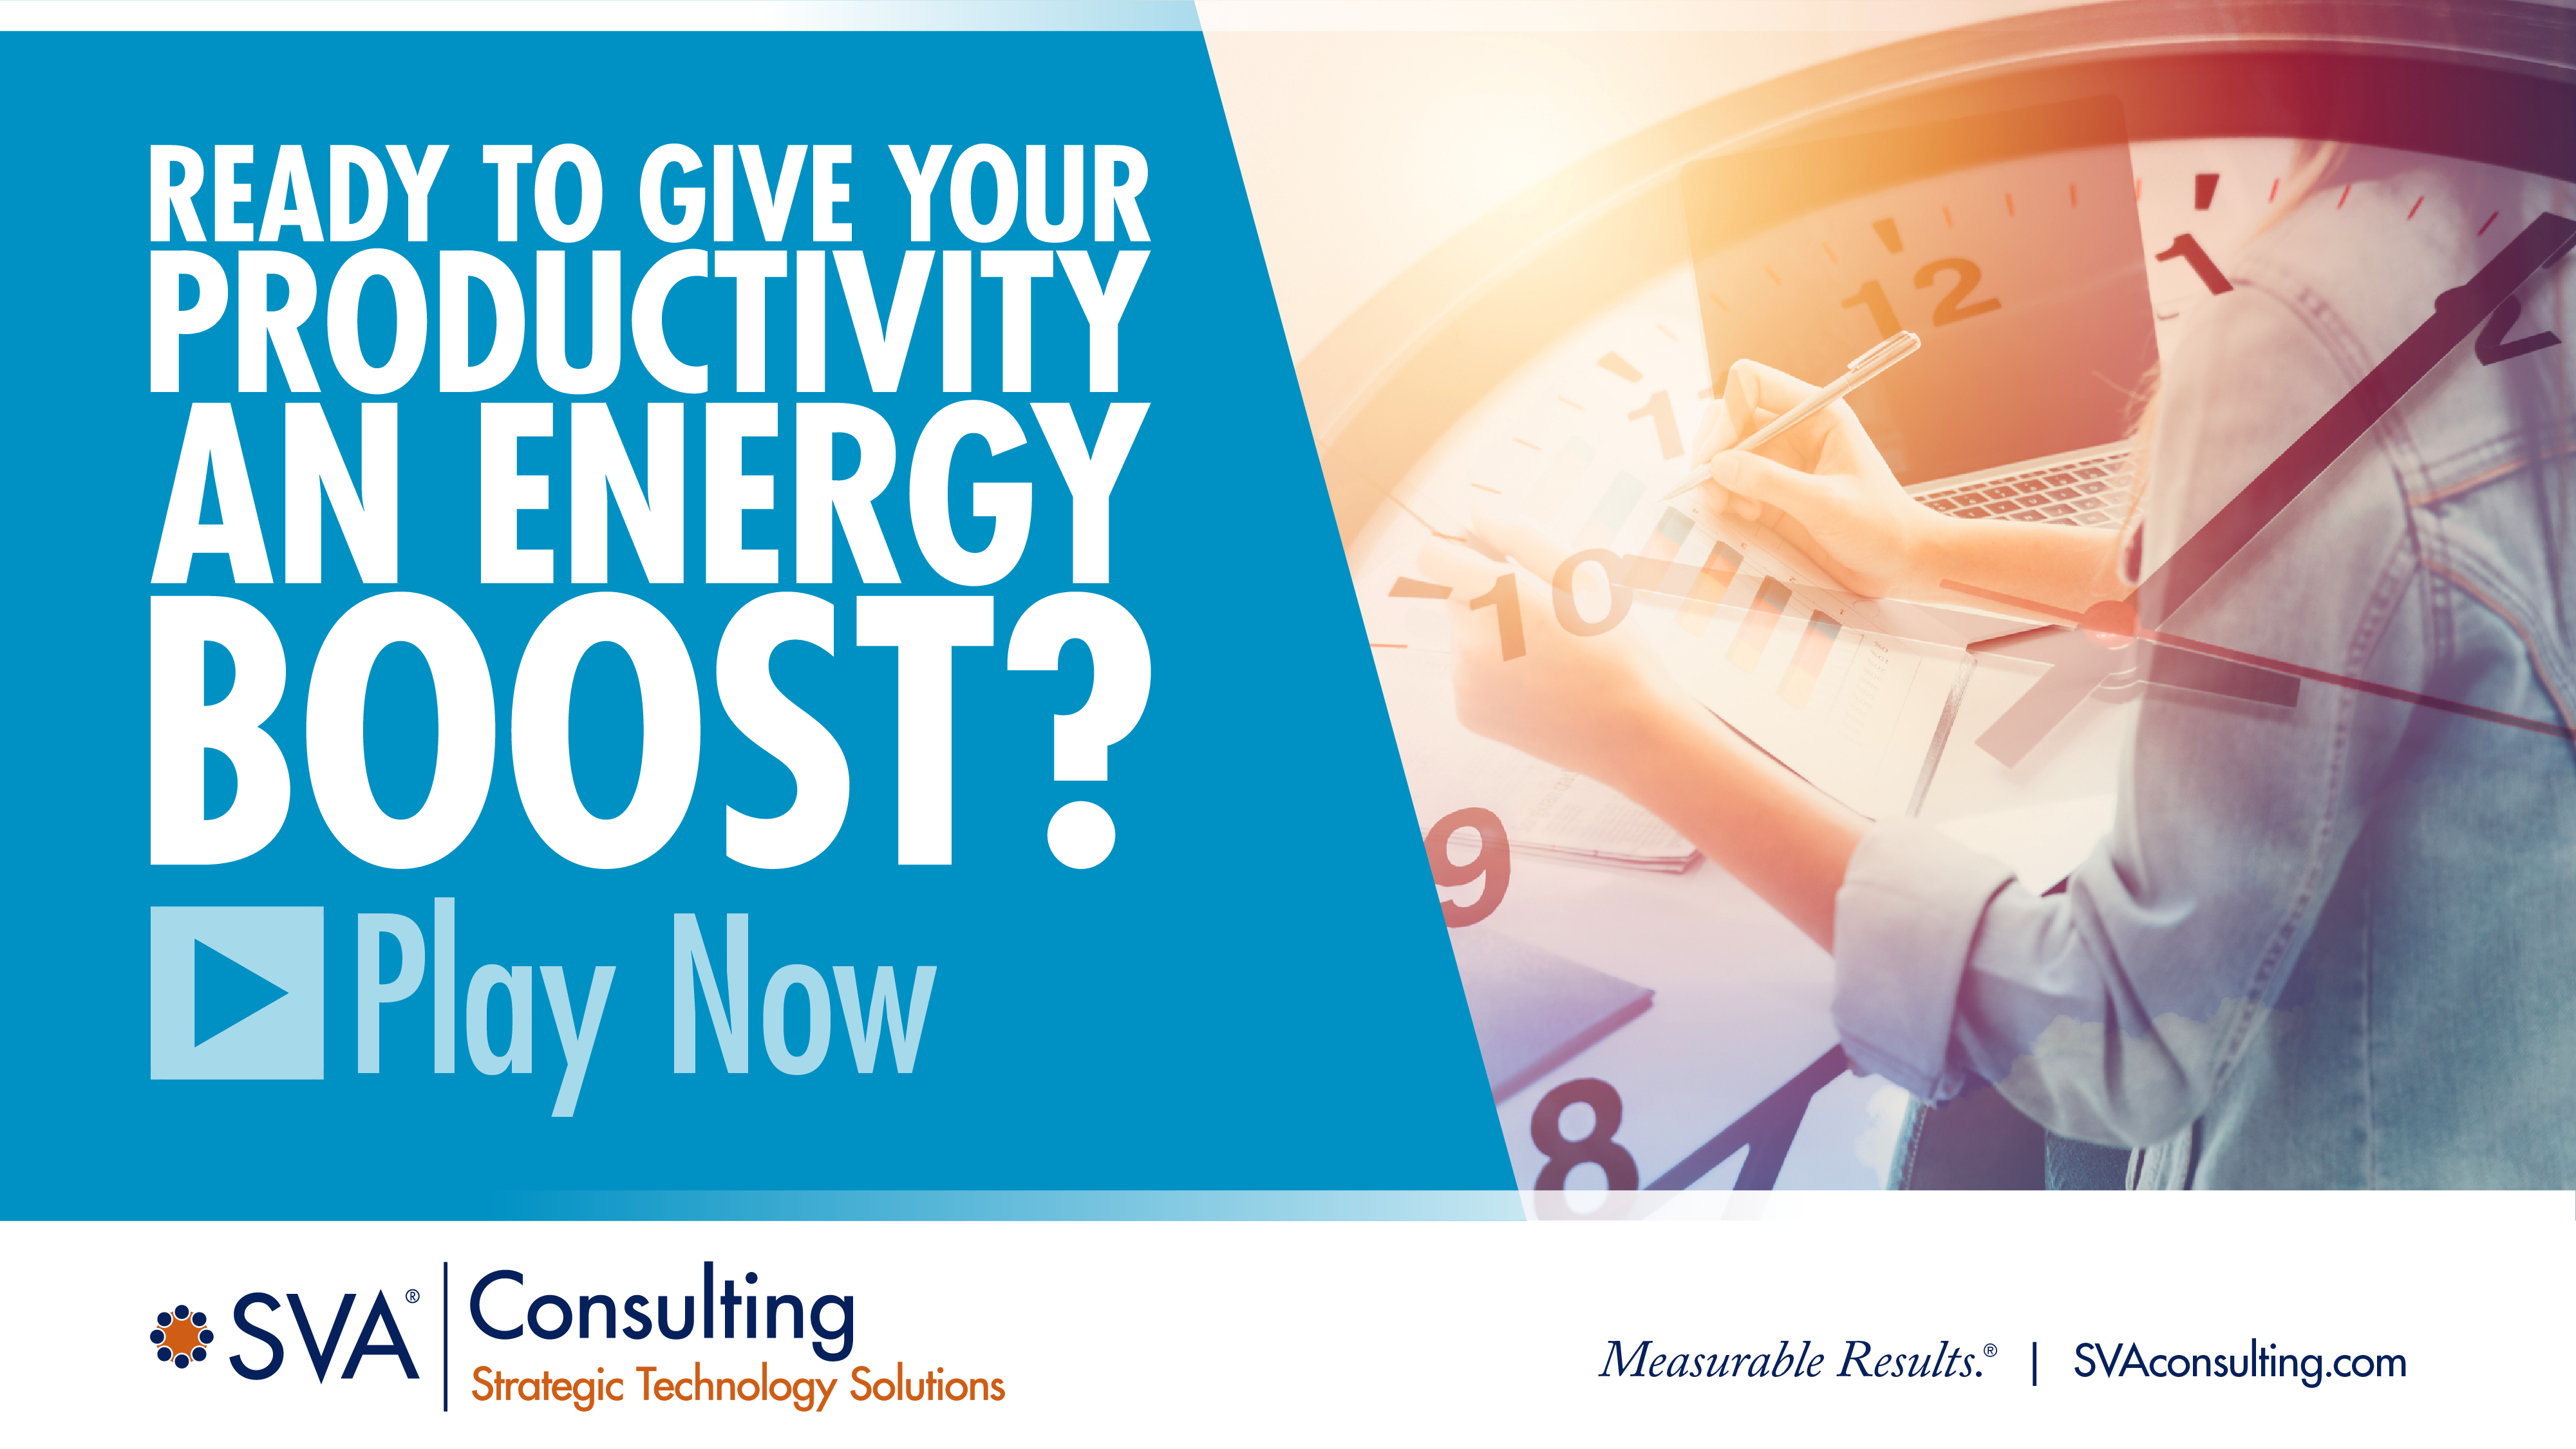 Ready to Give Your Productivity an ENERGY BOOST?